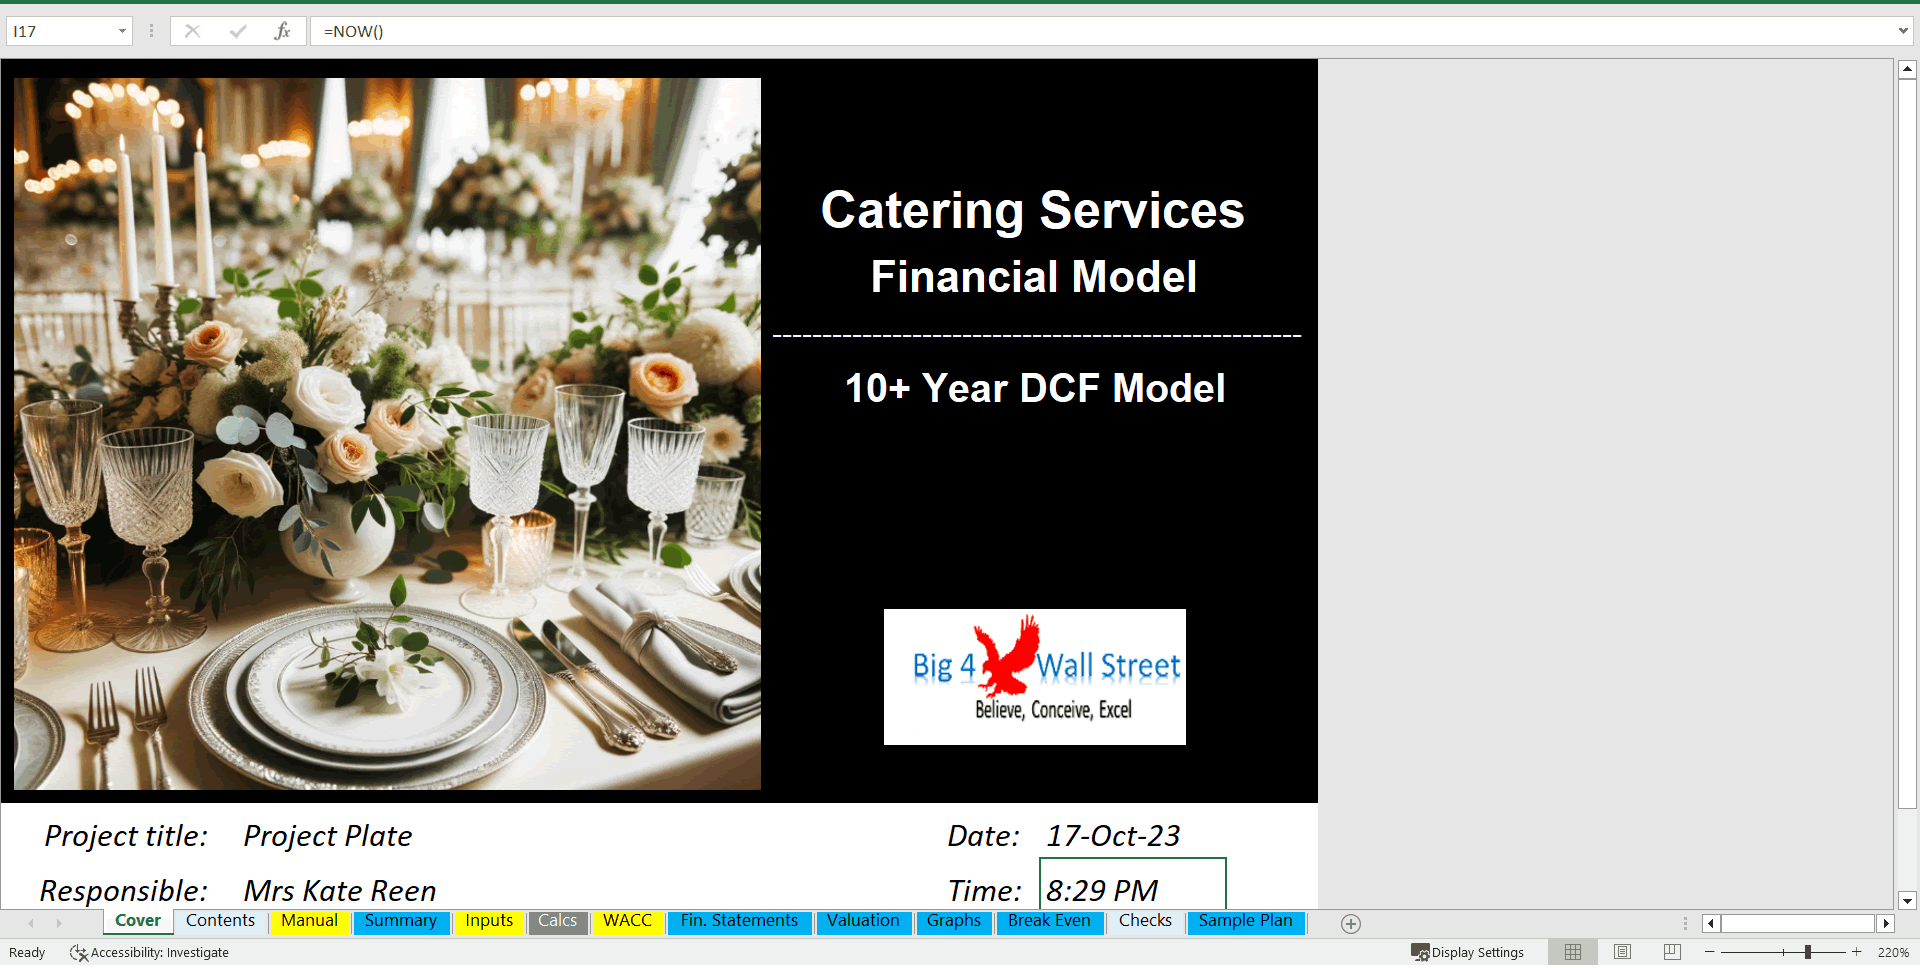 Catering Services Financial Model (10+ Year DCF & Valuation)